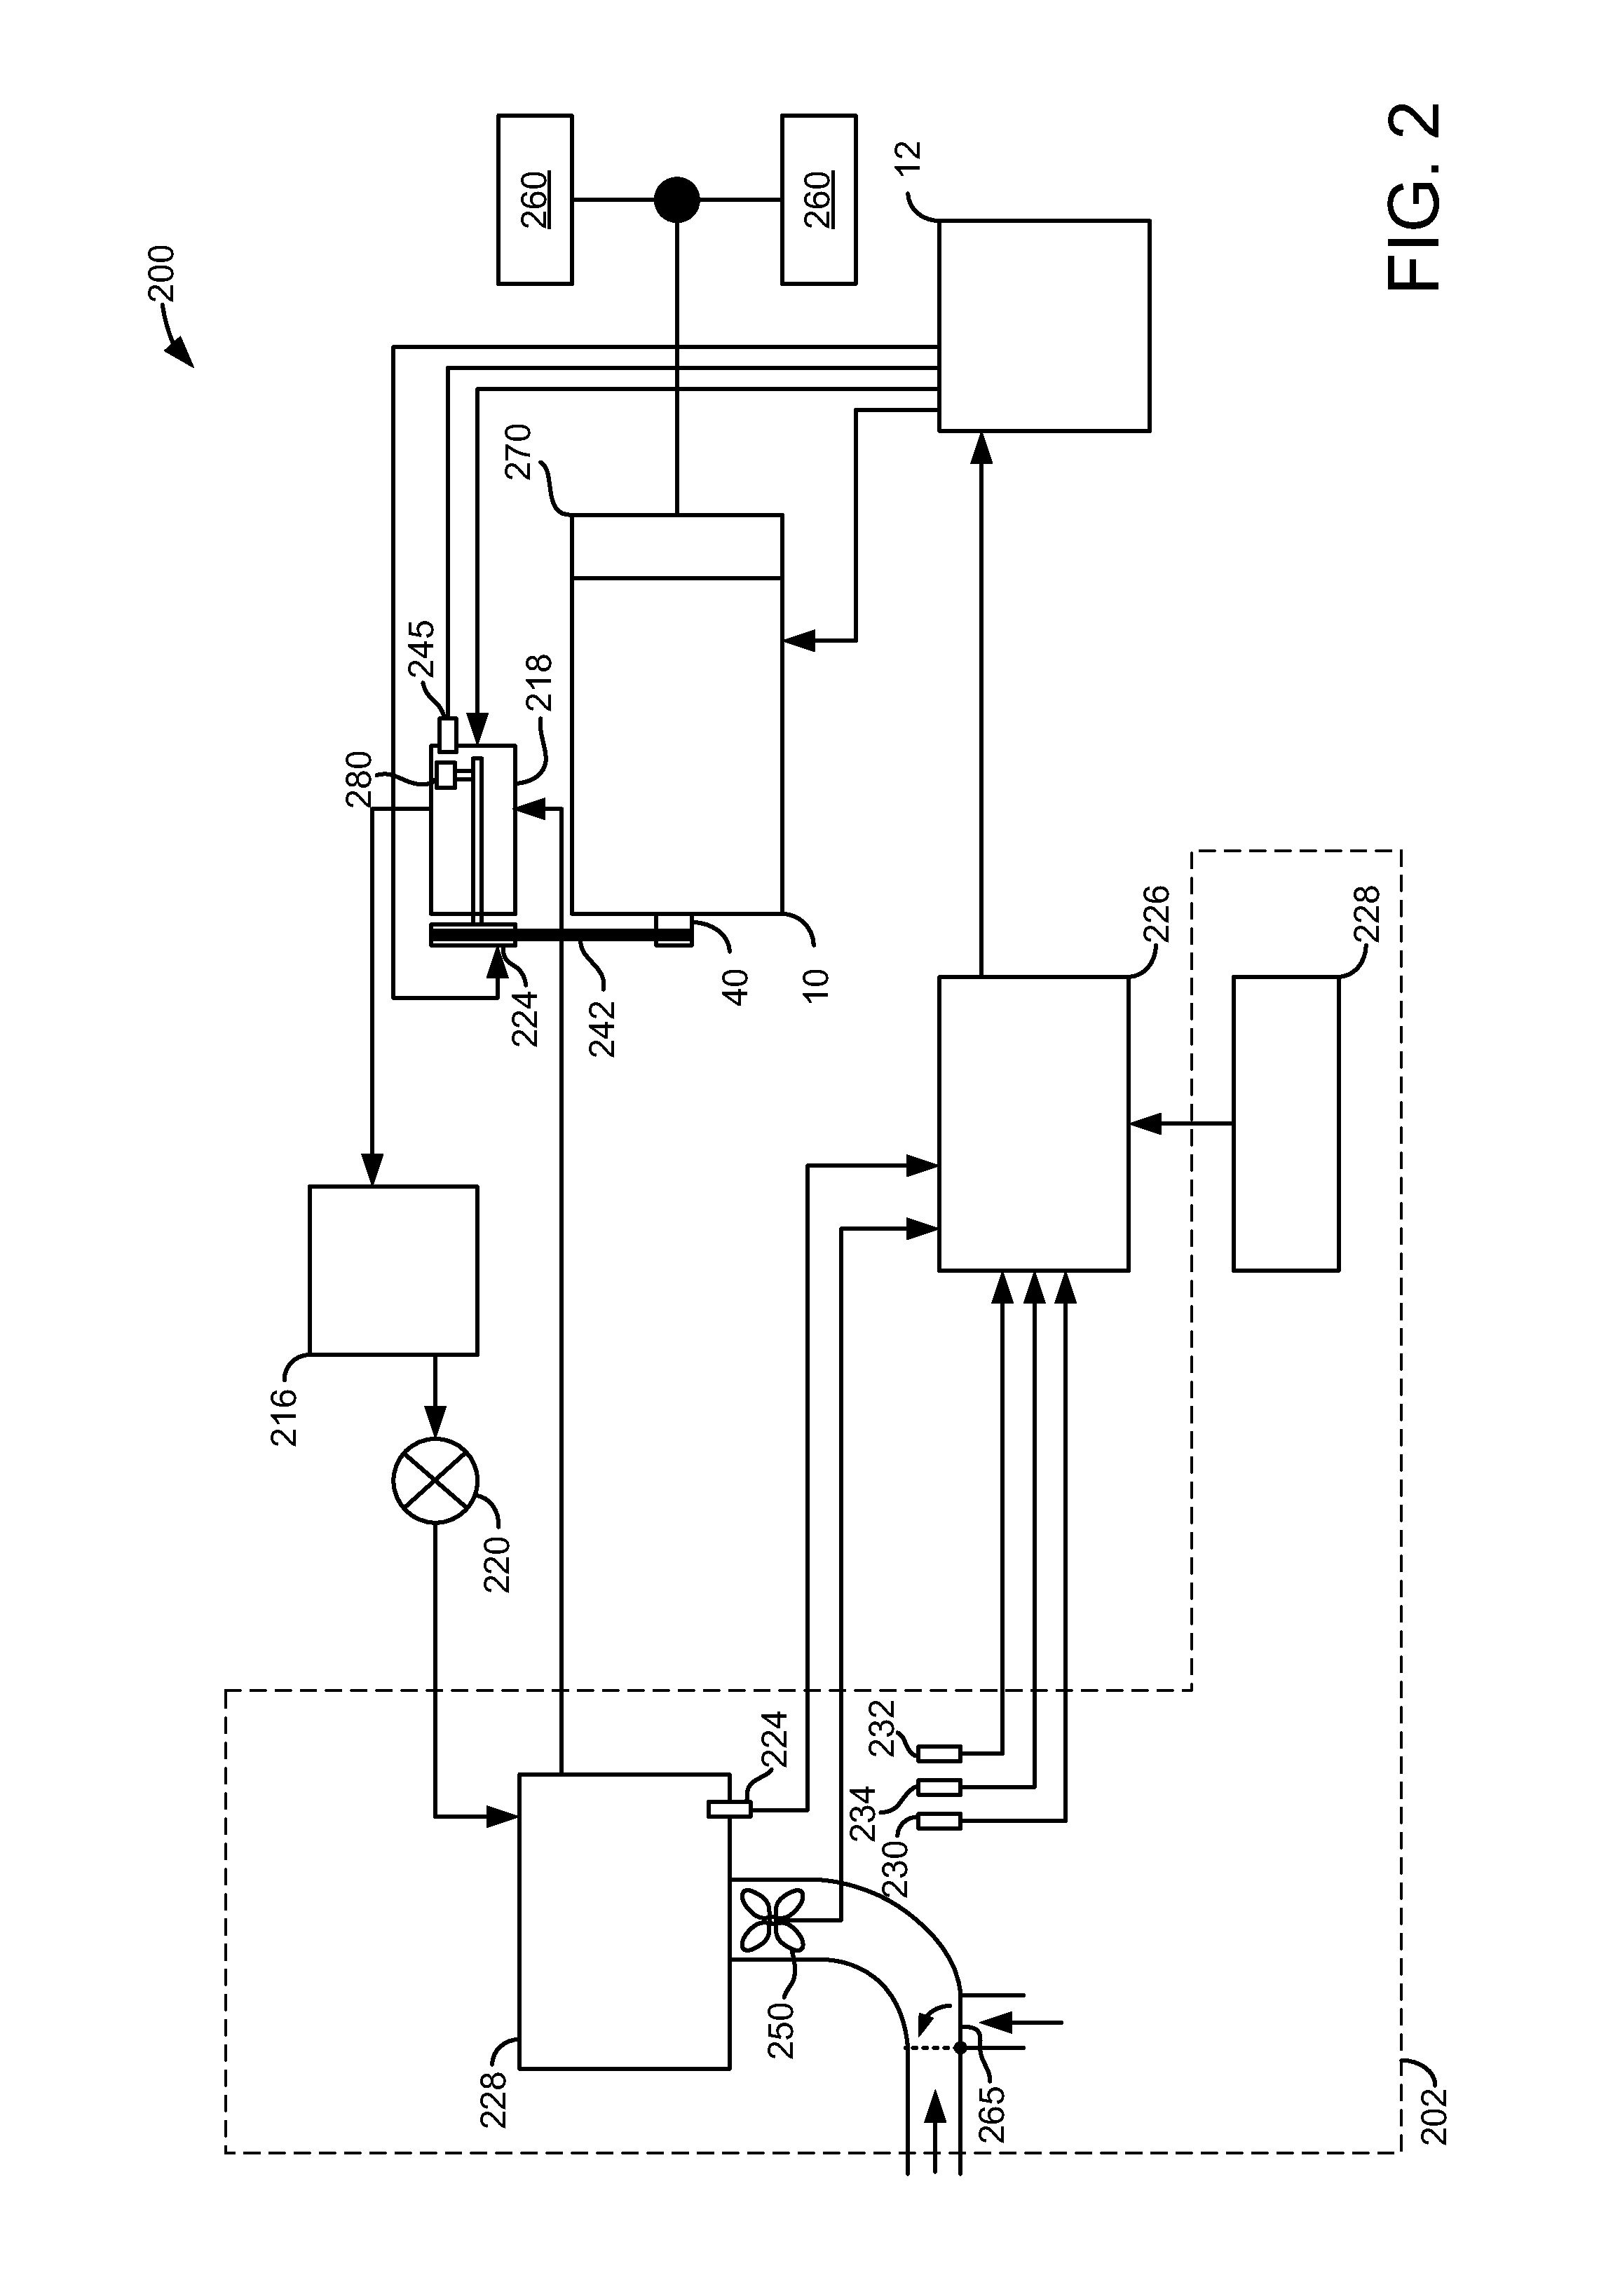 System and method for generating vacuum for a vehicle